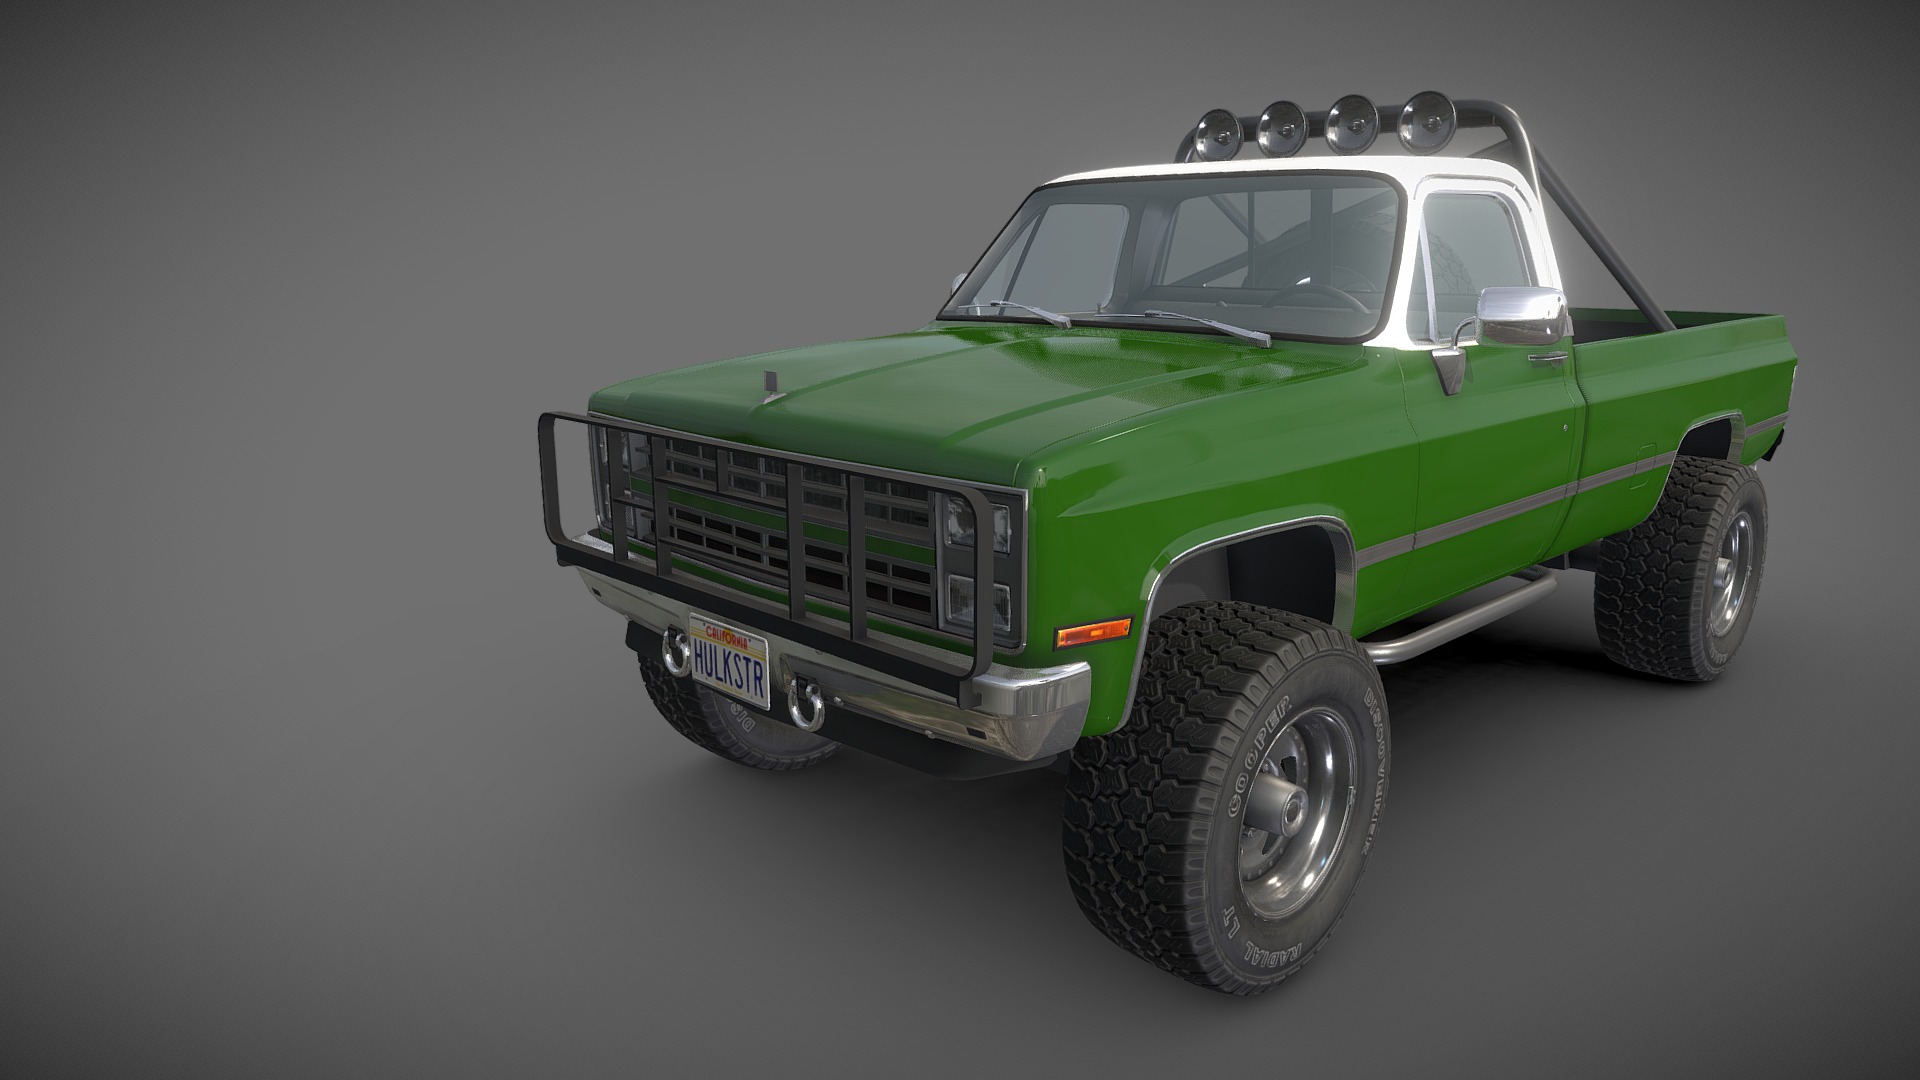 3D model Offroad pickup - This is a 3D model of the Offroad pickup. The 3D model is about a green truck with large tires.